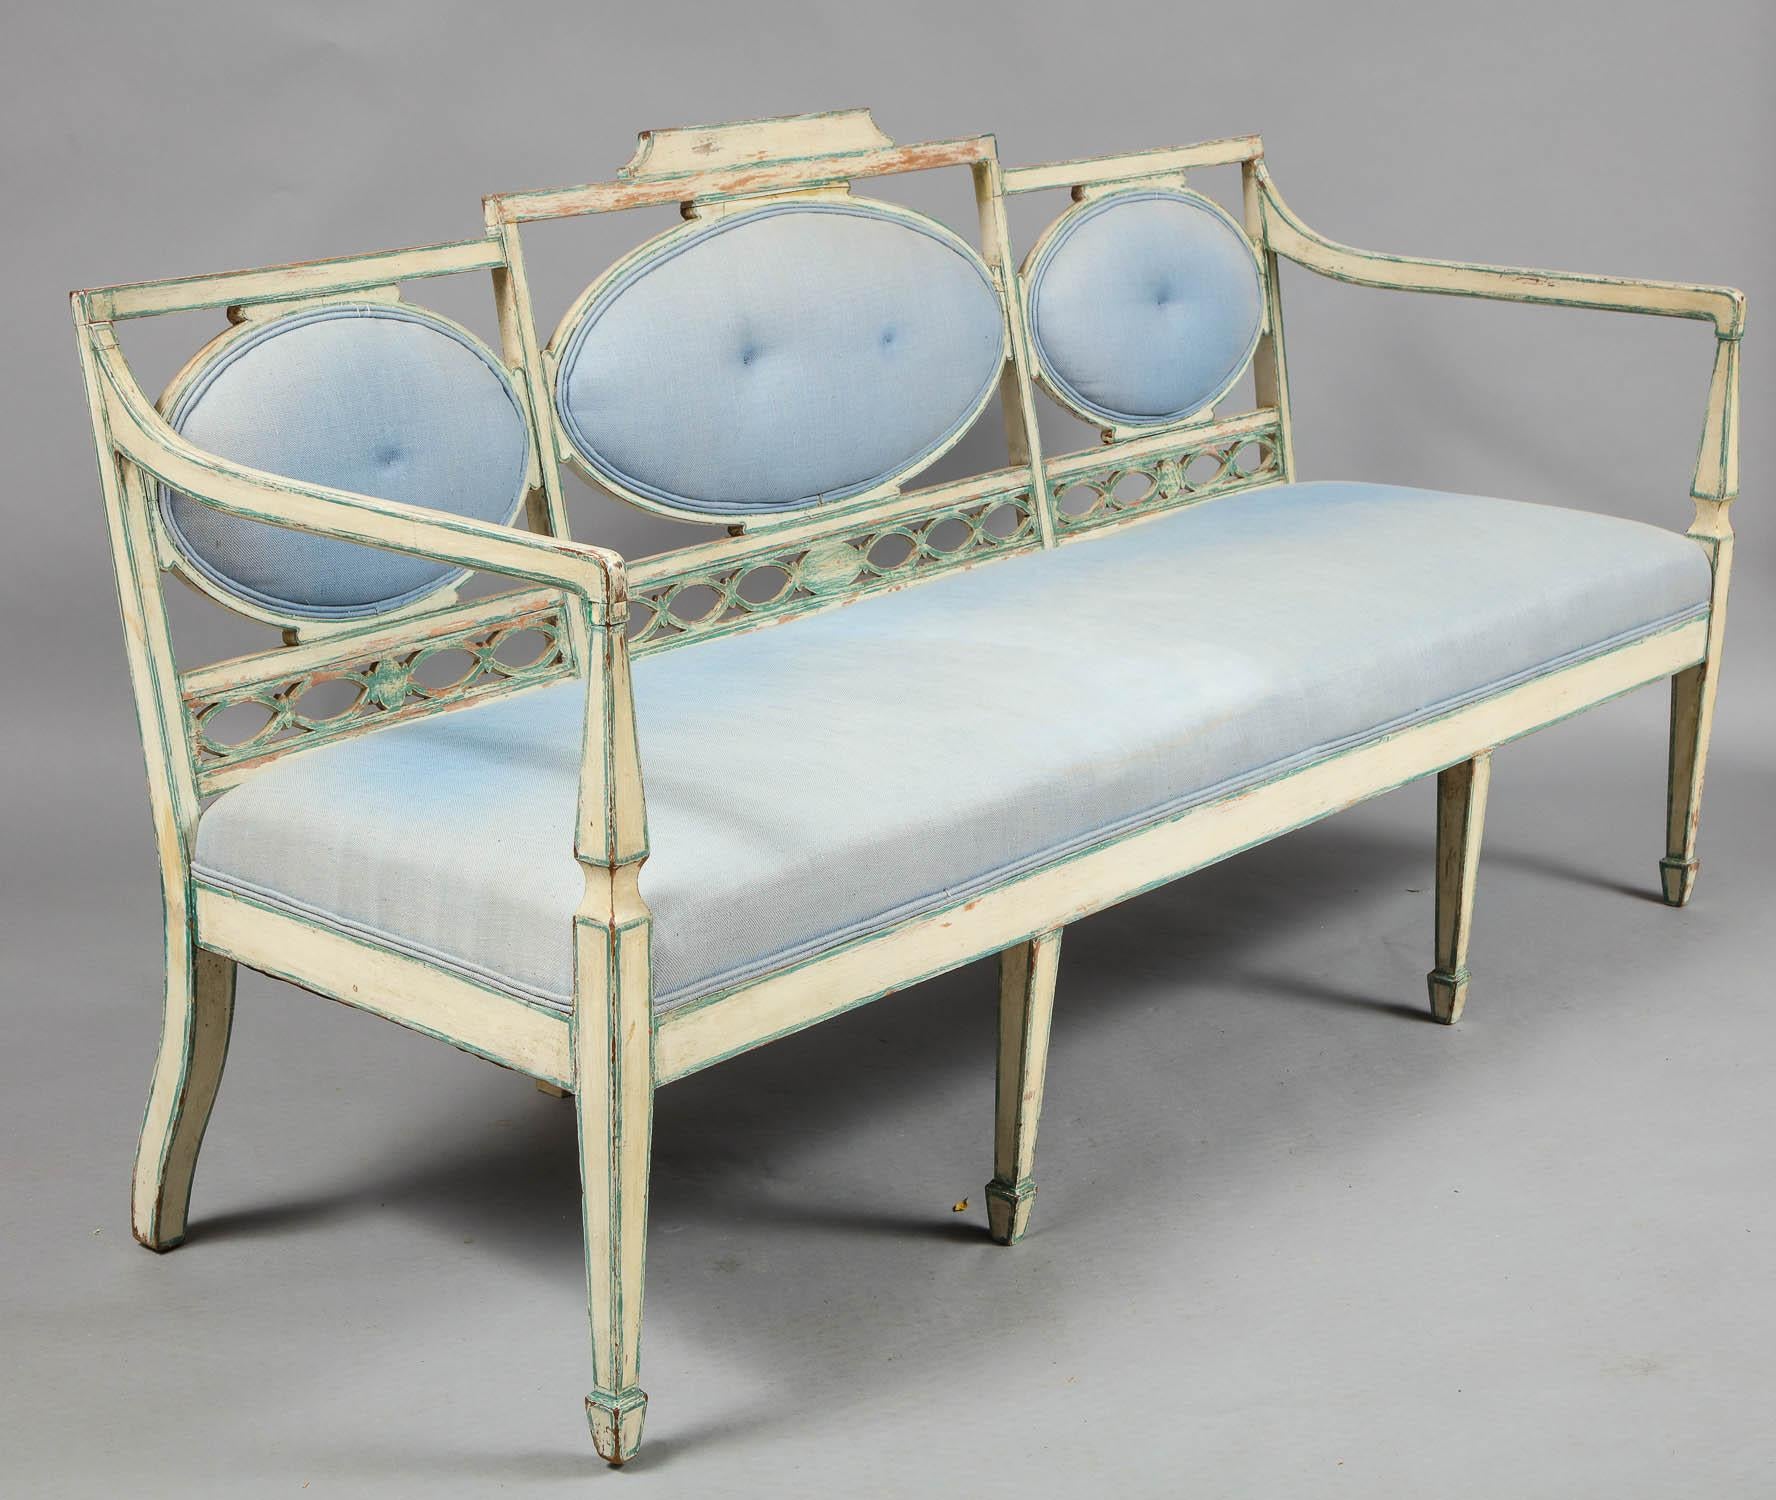 Fine early 19th century Swedish Gustavian painted neoclassical settee with oval padded back rests over lattice work lower back, the square tapered legs ending in spade feet, the whole in lovely worn old paint. Now upholstered, originally with cane